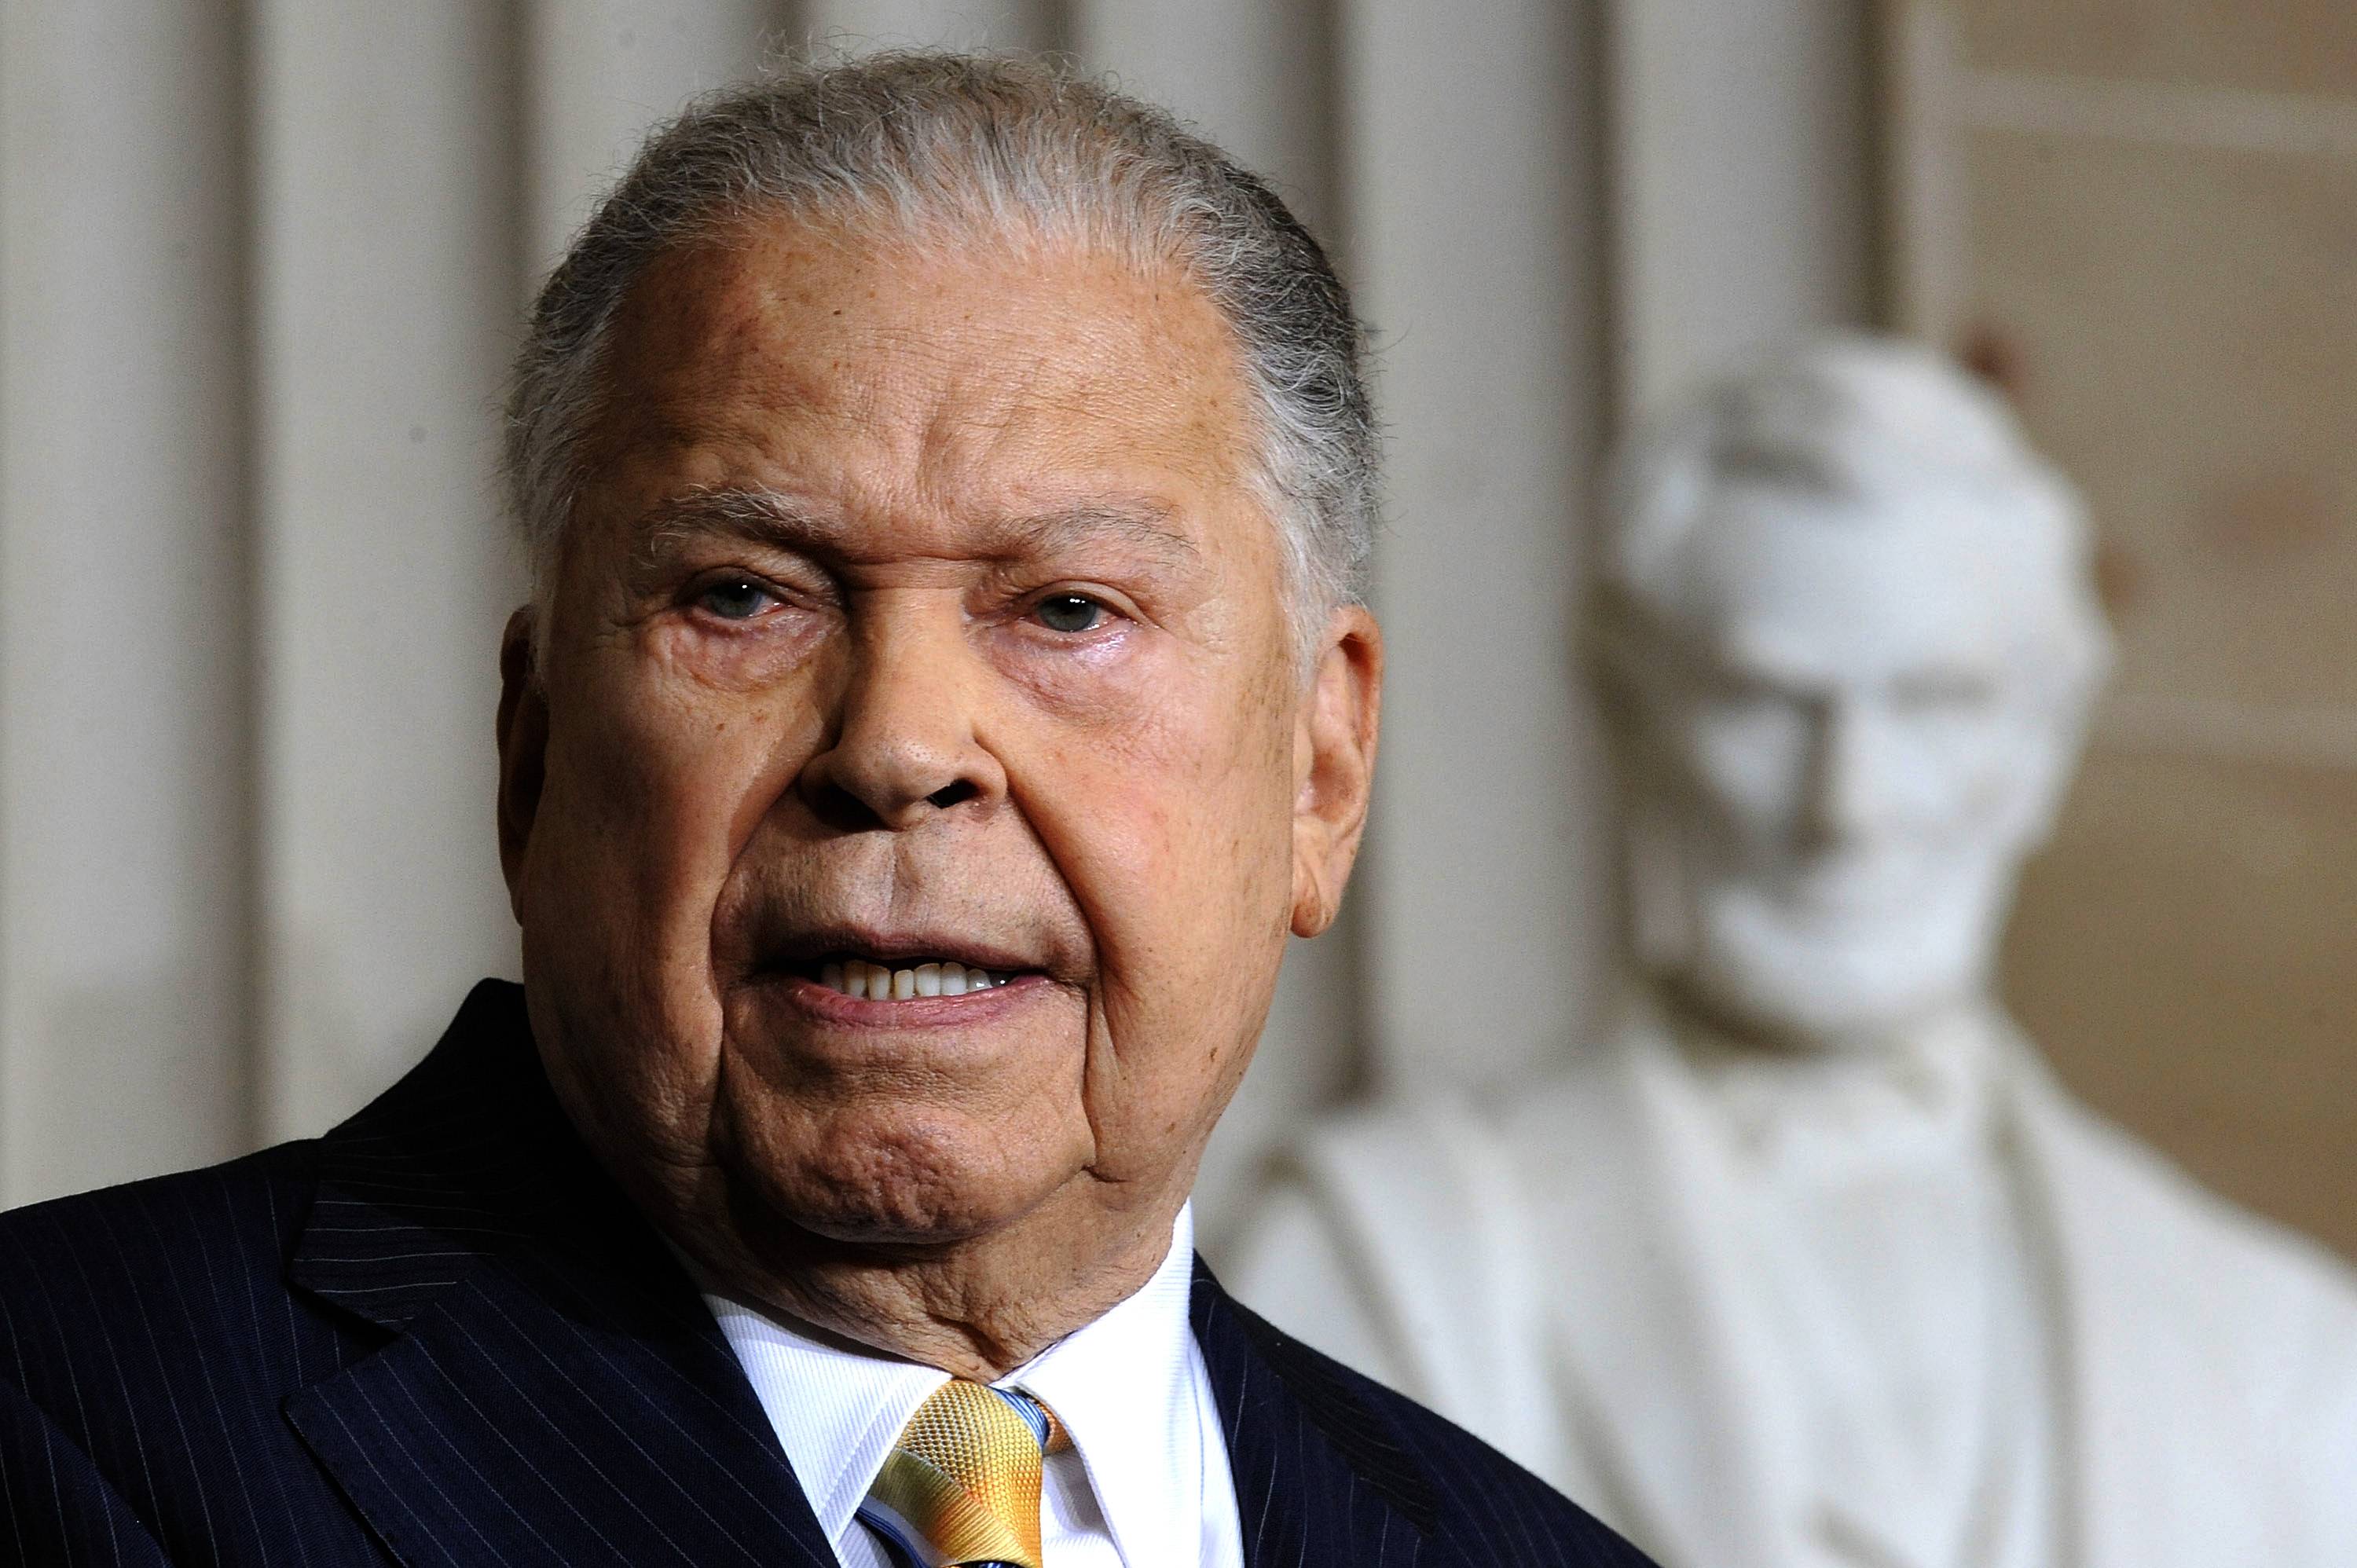 The Honorable Edward William Brooke - First African-American to be elected by popular vote to the U.S. Senate. He served as a Republican senator for Massachusetts.